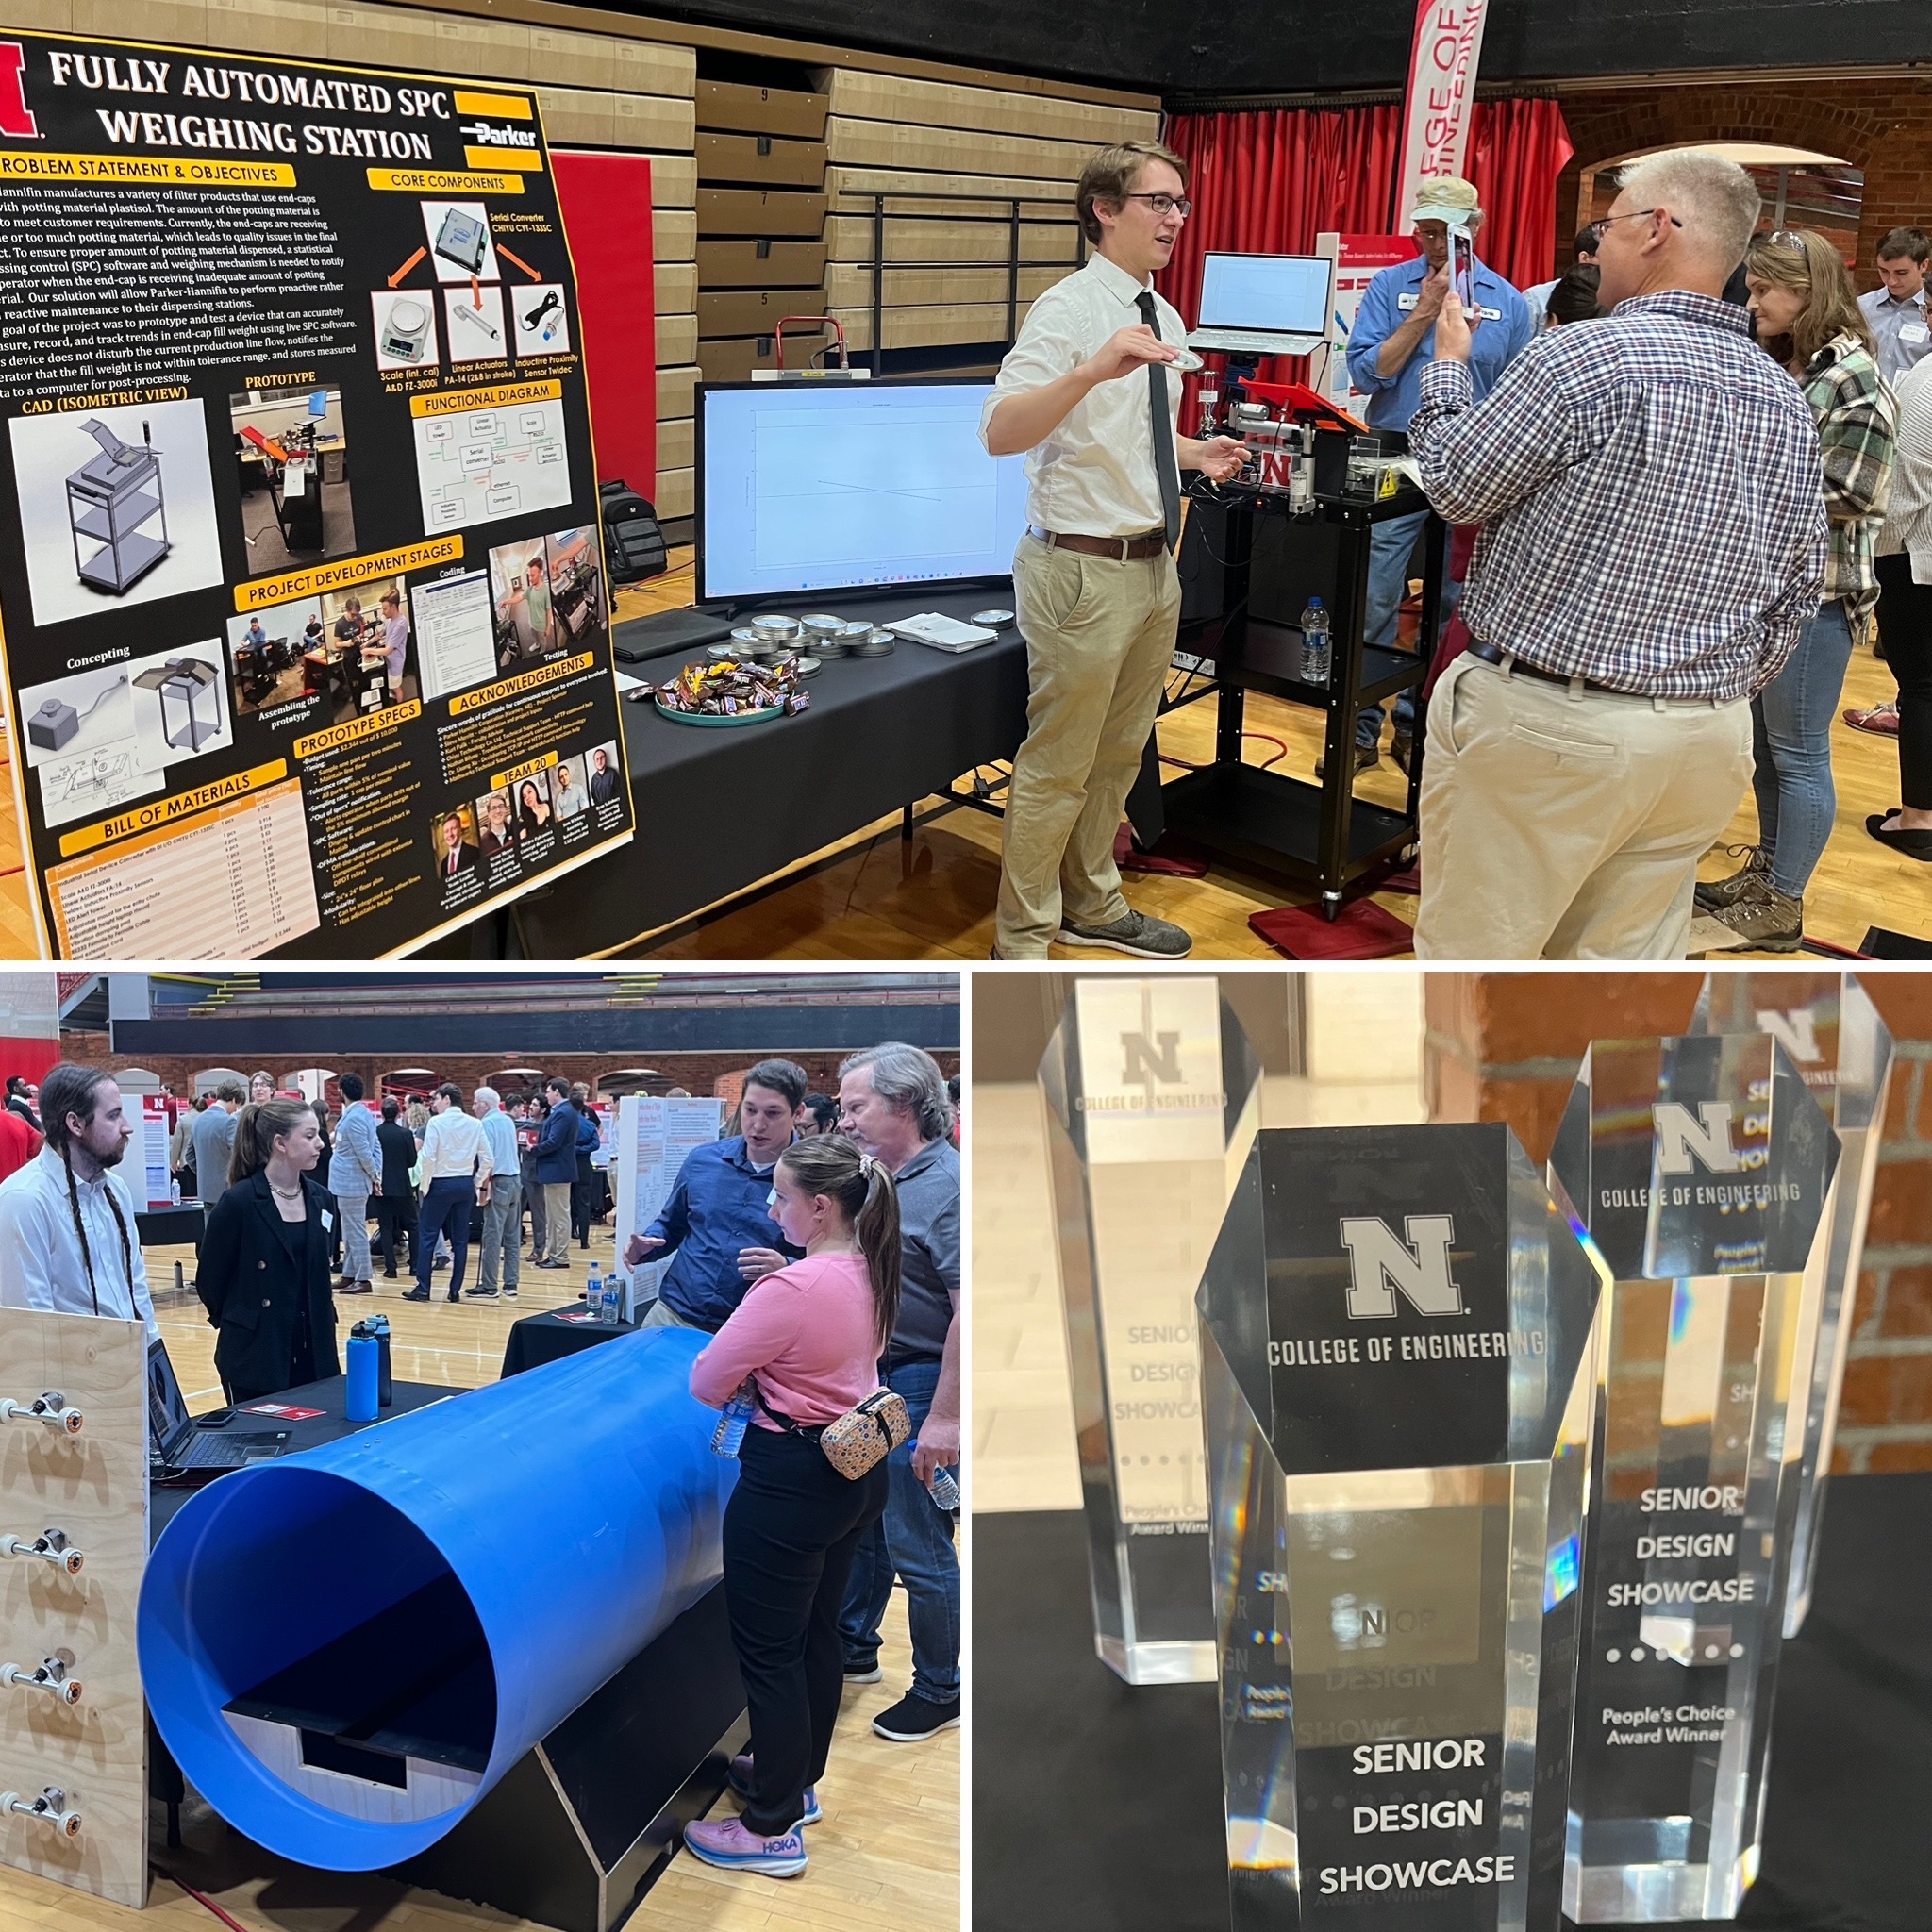 The 2024 Senior Design Showcases will be Friday, May 3 (College of Engineering) and Thursday, May 9 (School of Computing). A Senior Recognition Reception will follow the May 3 event. 